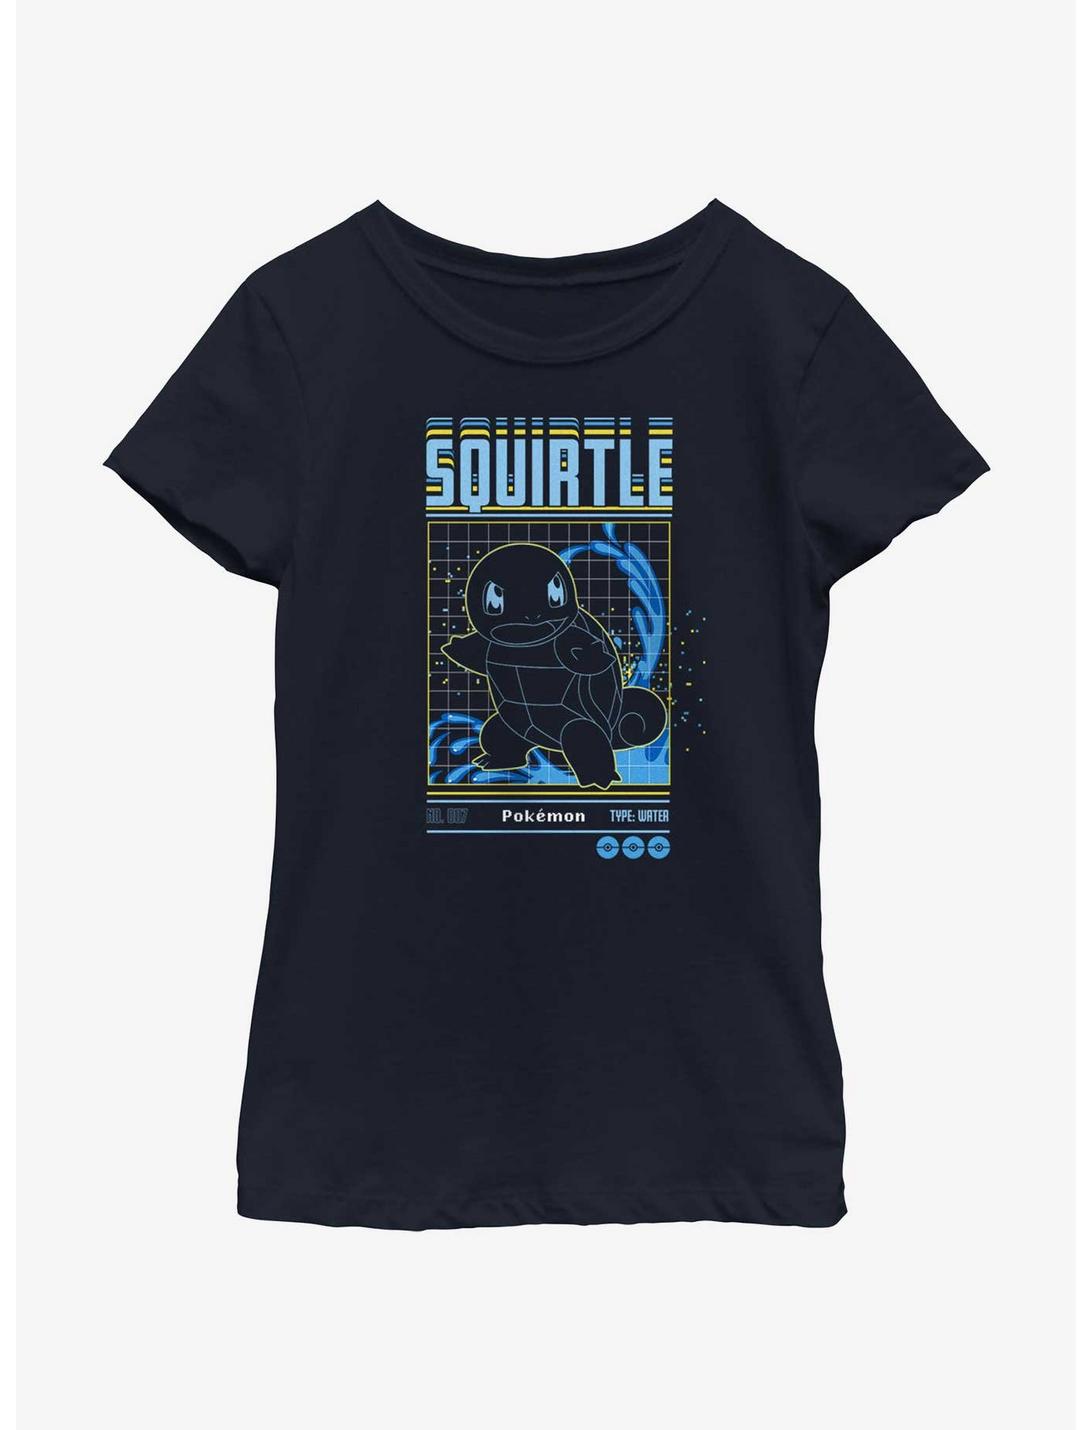 Pokemon Squirtle Grid Youth Girls T-Shirt, NAVY, hi-res